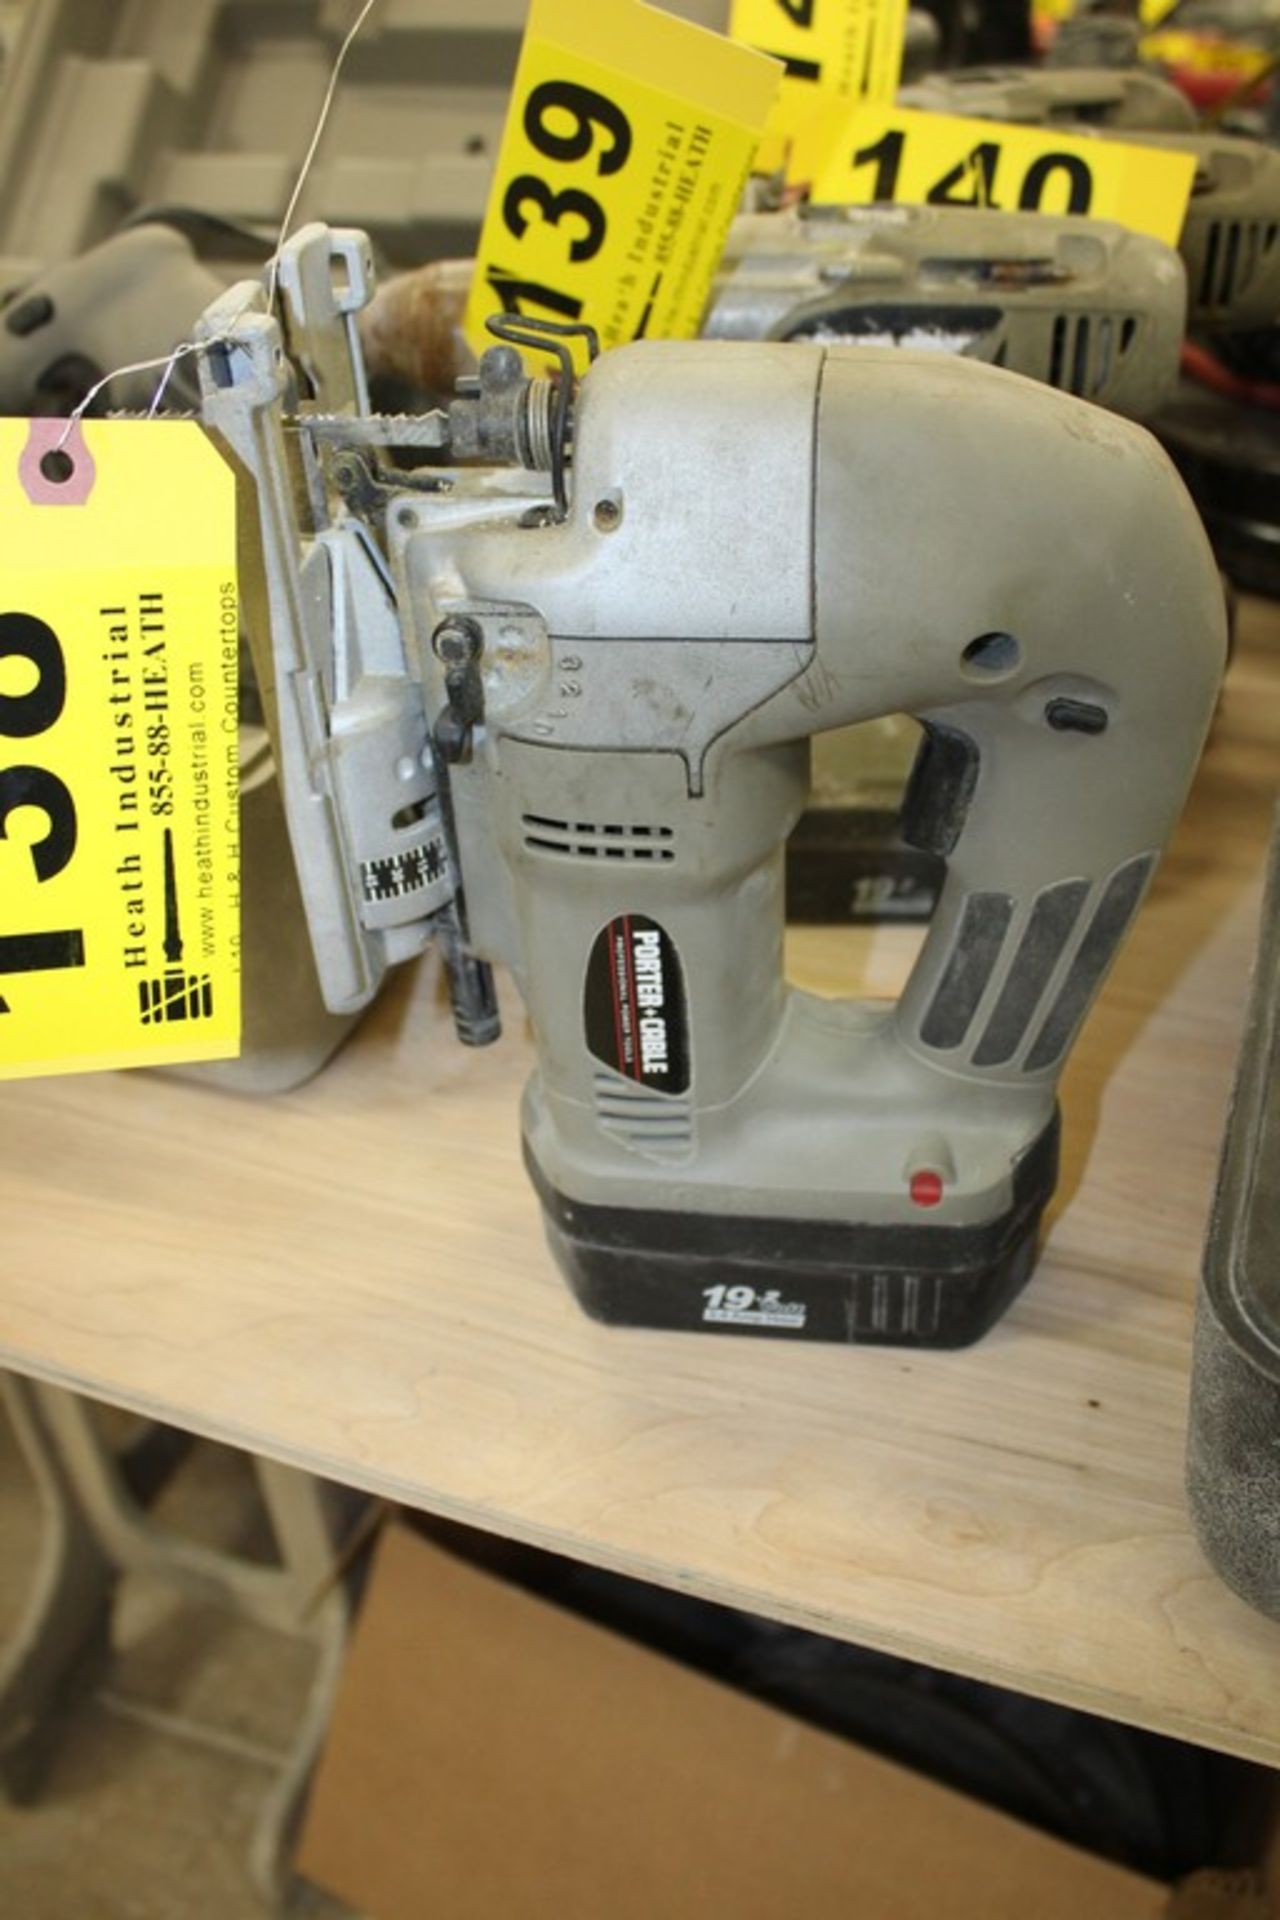 PORTER CABLE BATTERY OPERATED JIG SAW MODEL 643 19.2 VOLT - Image 2 of 2